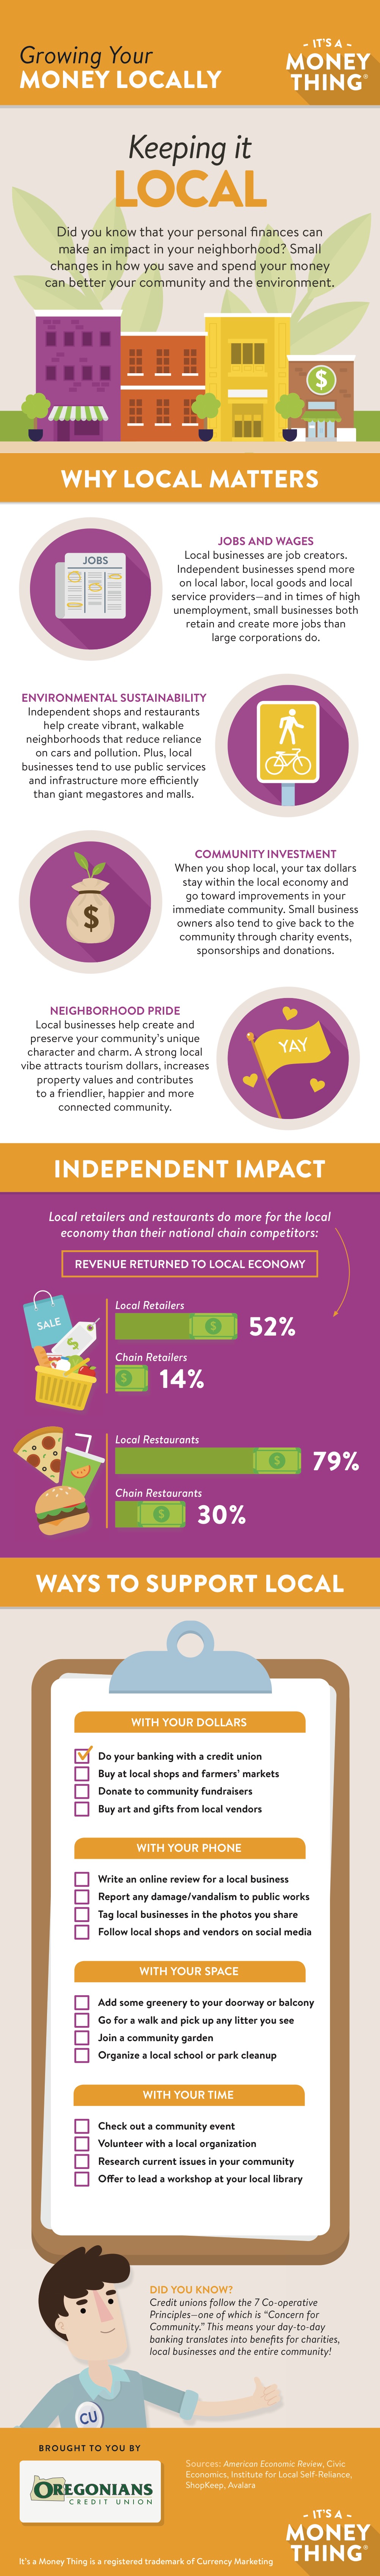 Growing Your Money Locally infographic